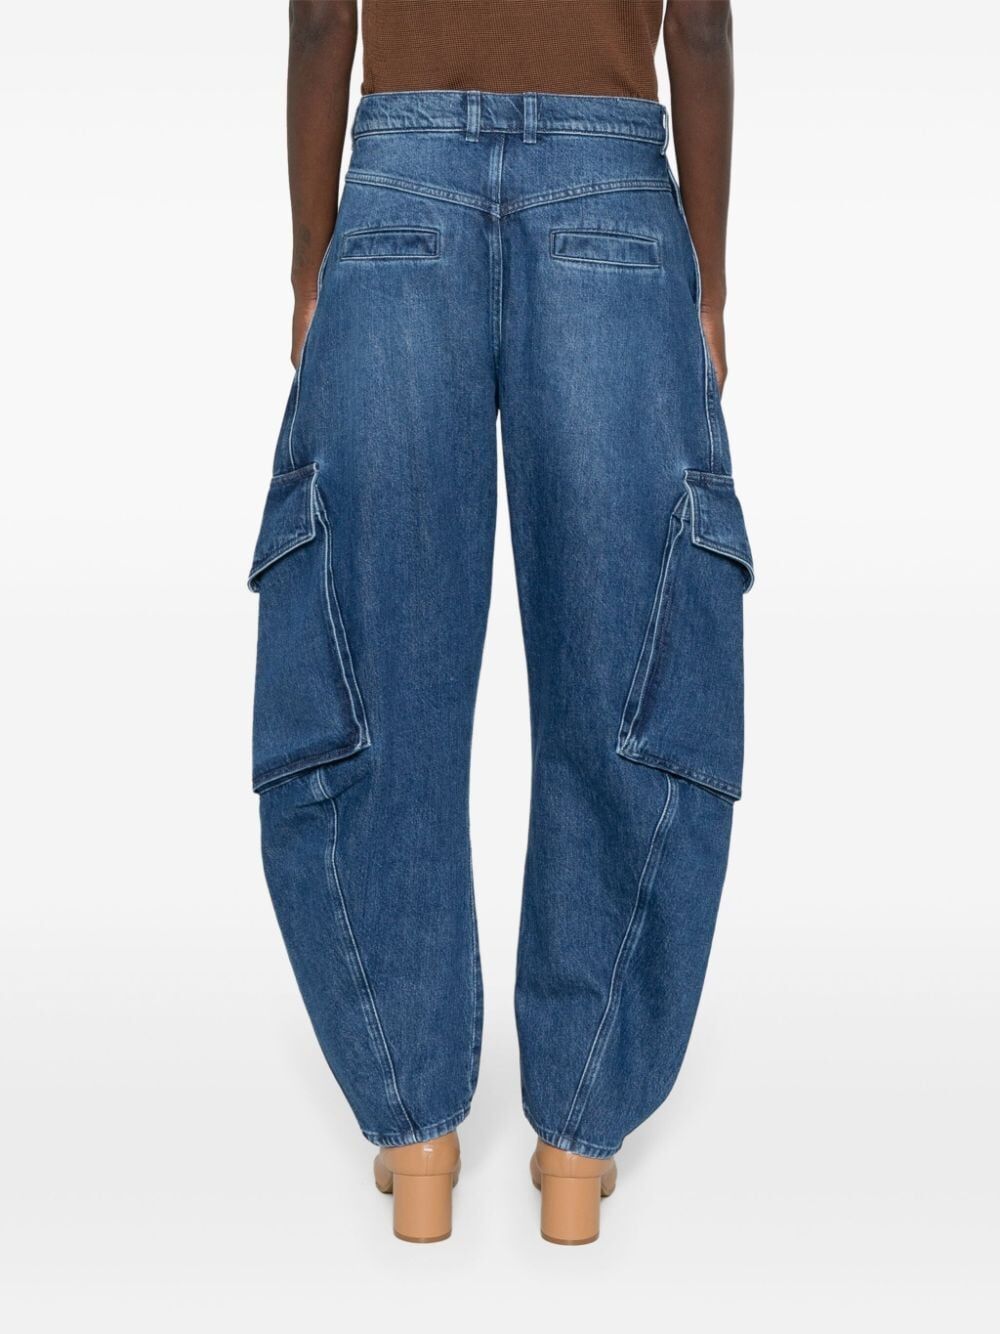 JW ANDERSON-TWISTED CARGO JEANS-DT0091 PG1560 800